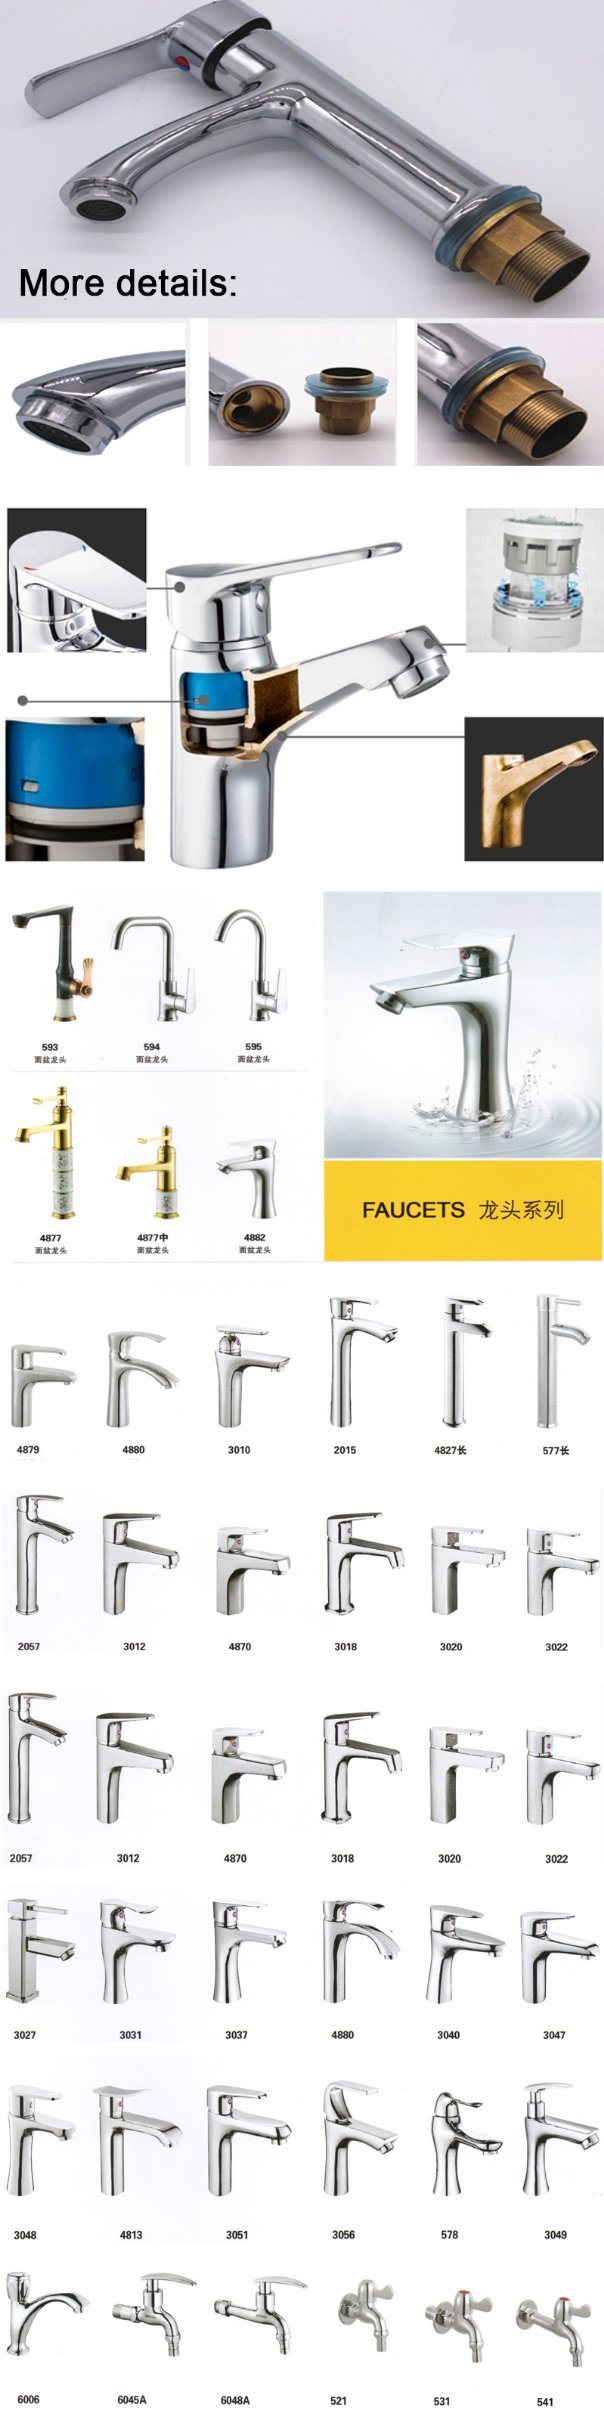 Chrome Bath Tub Hand Hold Shower Mixer Faucet From China Wide